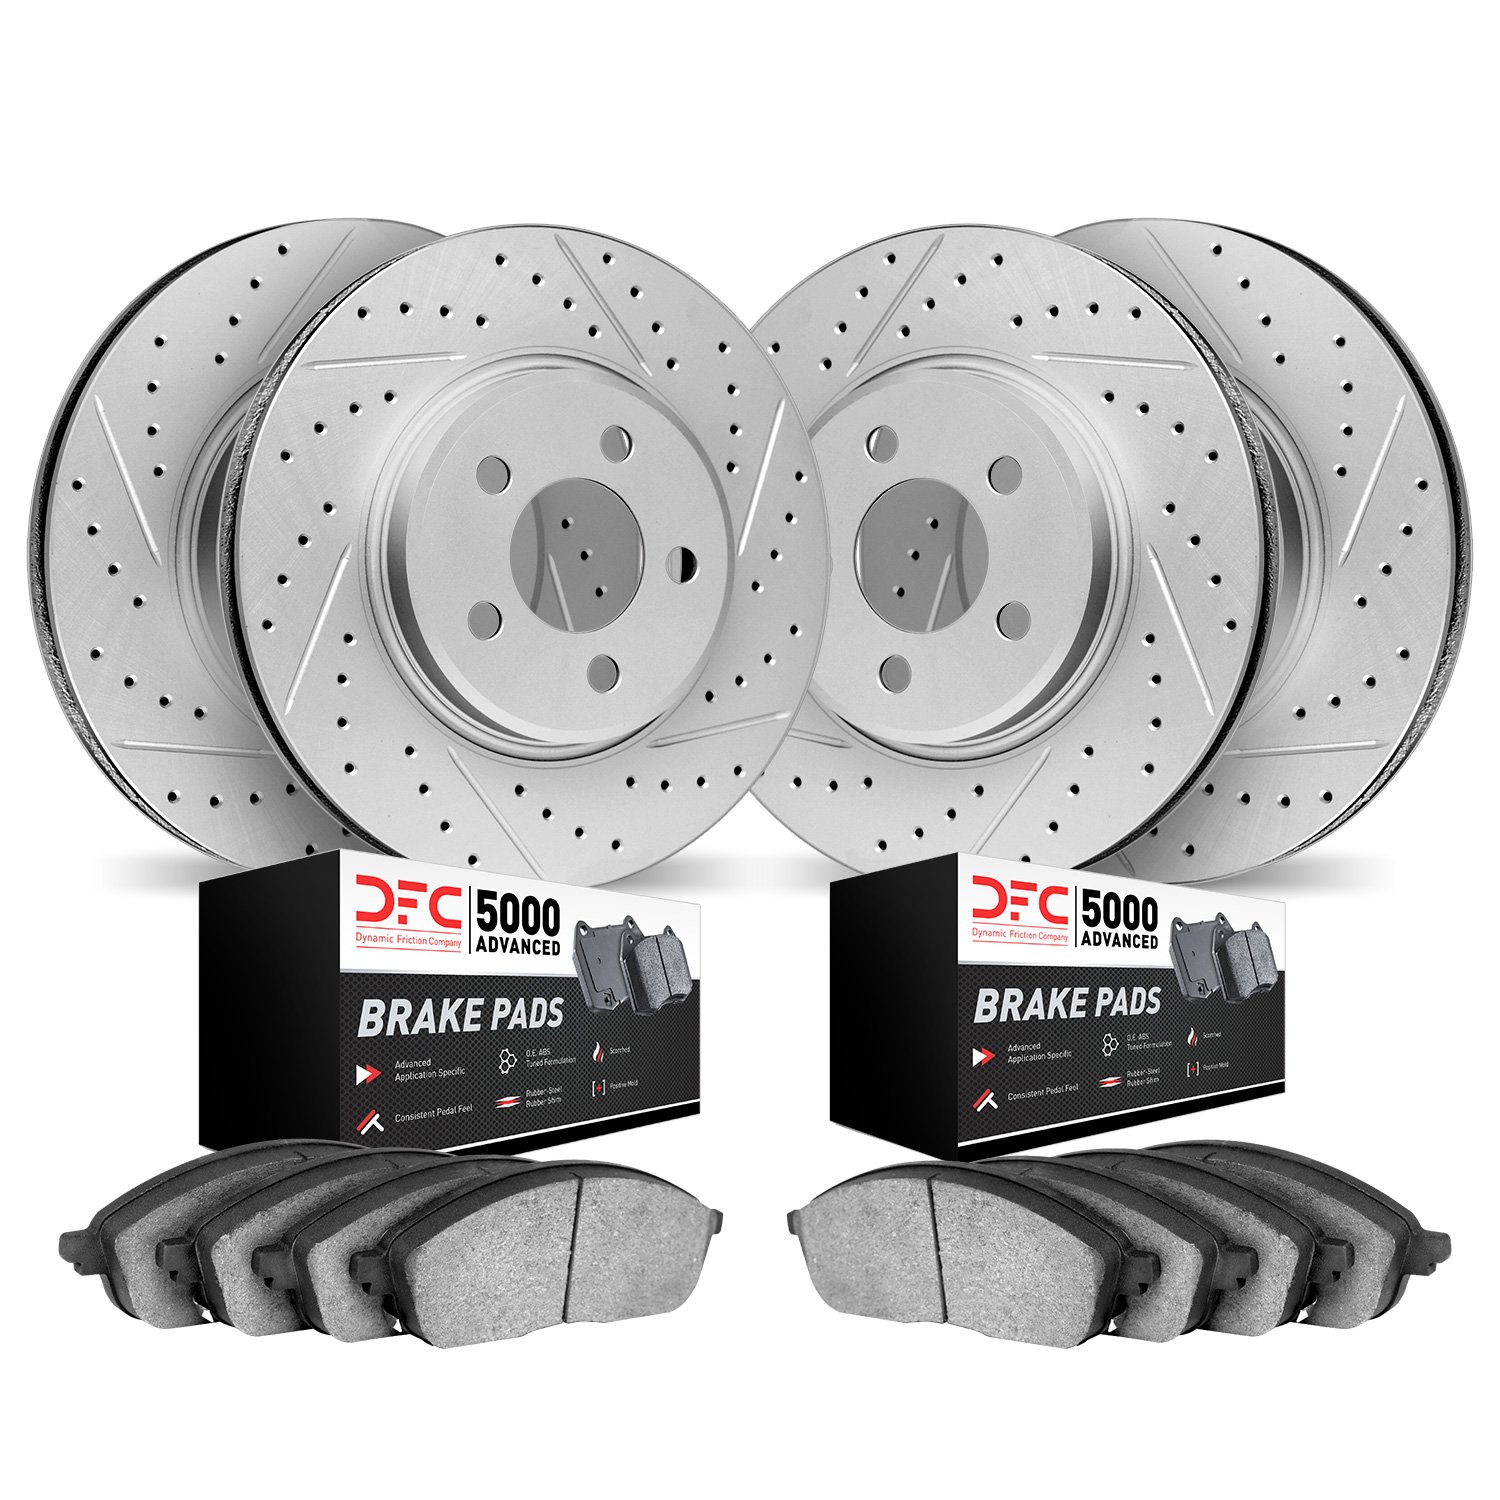 2504-13004 Geoperformance Drilled/Slotted Rotors w/5000 Advanced Brake Pads Kit, 2003-2004 Subaru, Position: Front and Rear